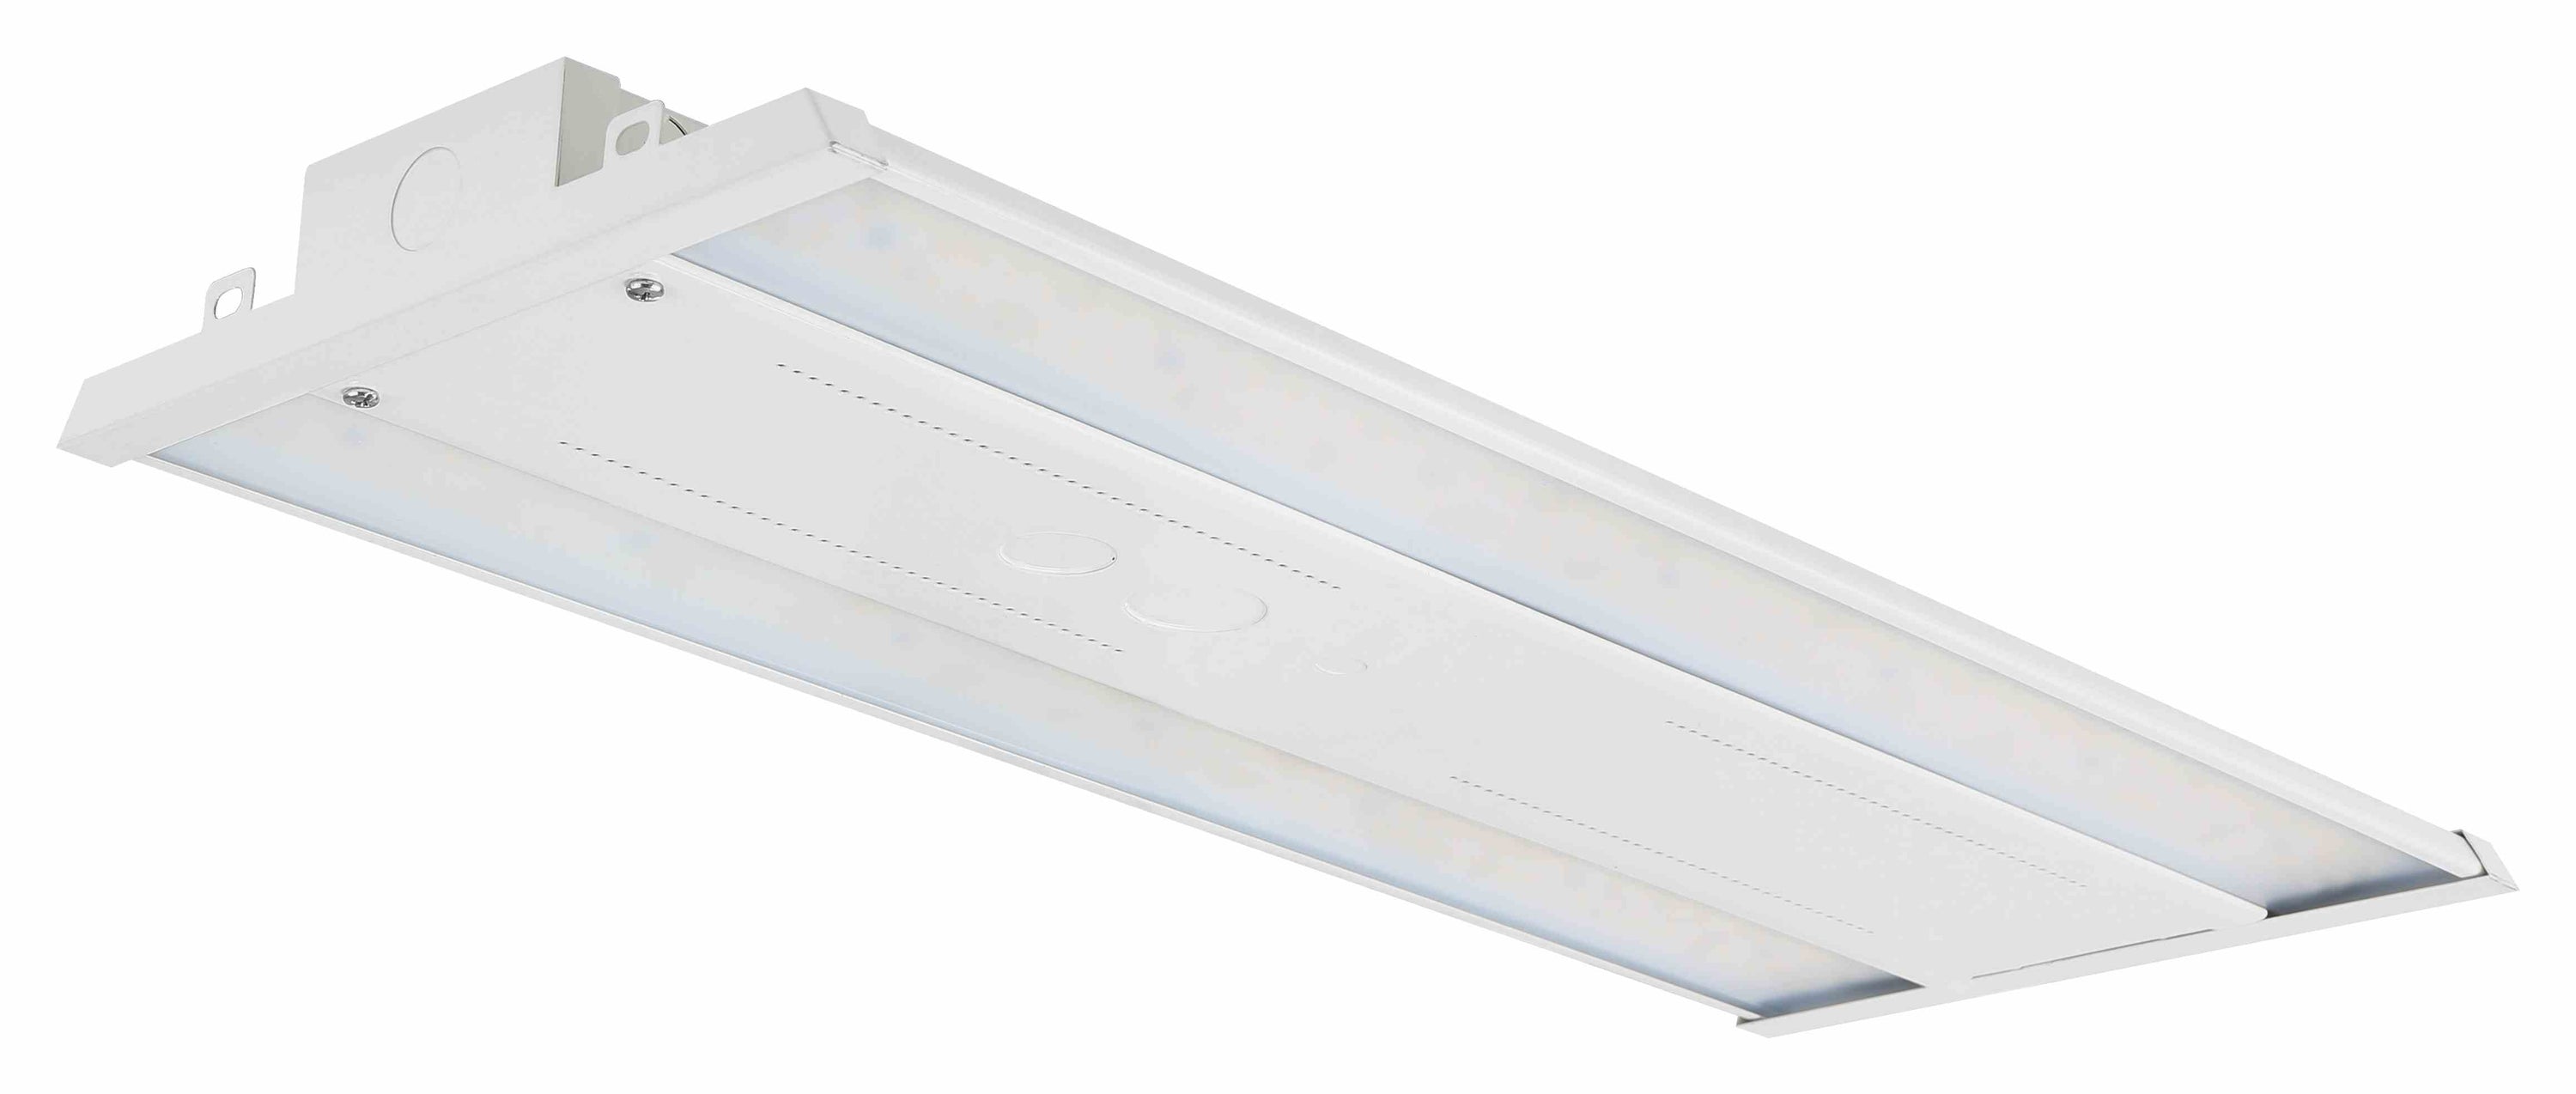 MLH06 Linear LED High Bay Light Fixture 30000 Lumens (5000/4000K) CCT Tunable LH06 Wattage Selectable Max Wattage 210W (210W/180W/130W/100W) 120-277VAC